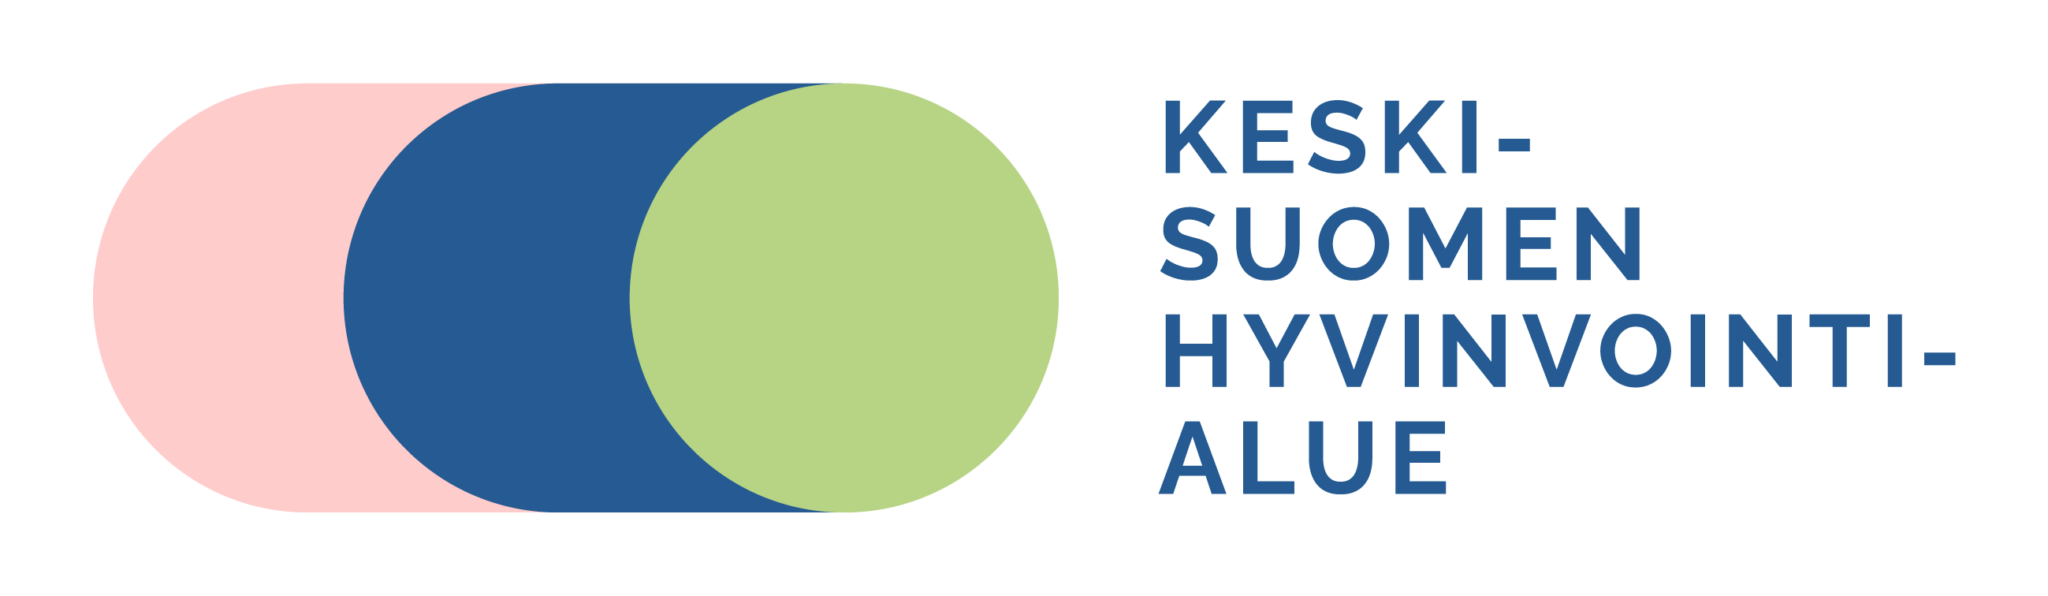 The wellbeing services county of Central Finland logo